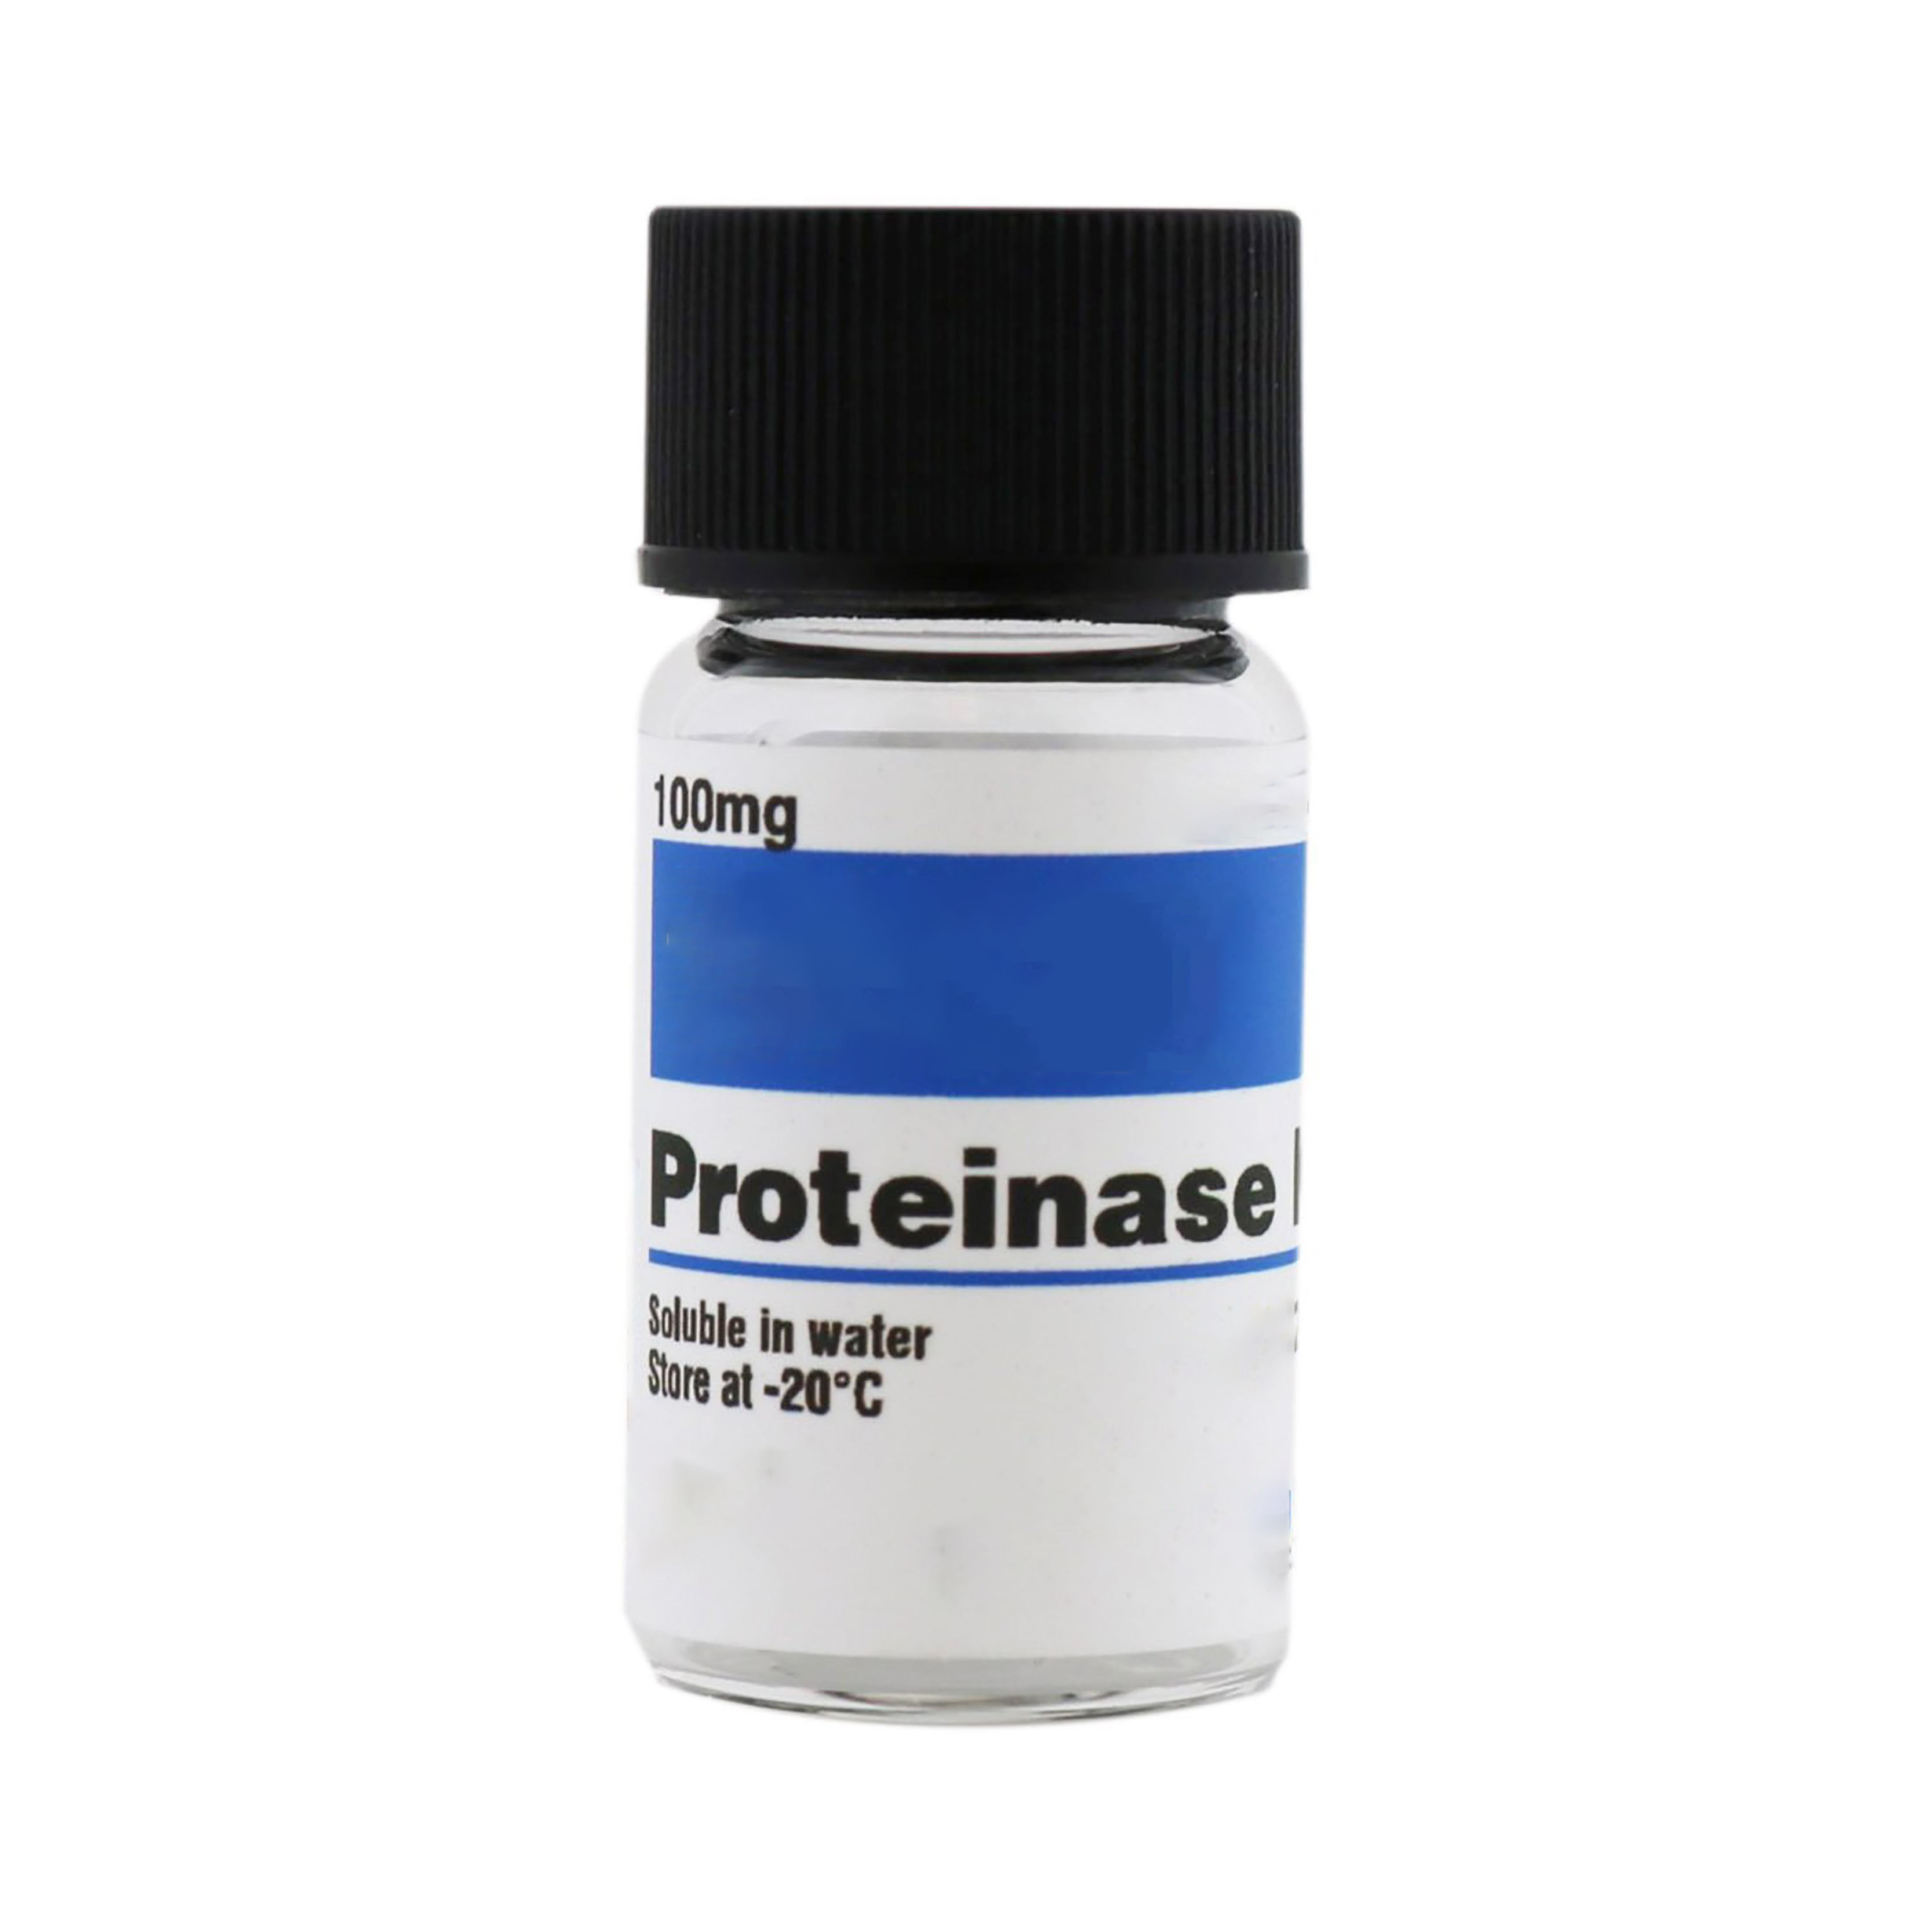 Proteinase K with stock 5g